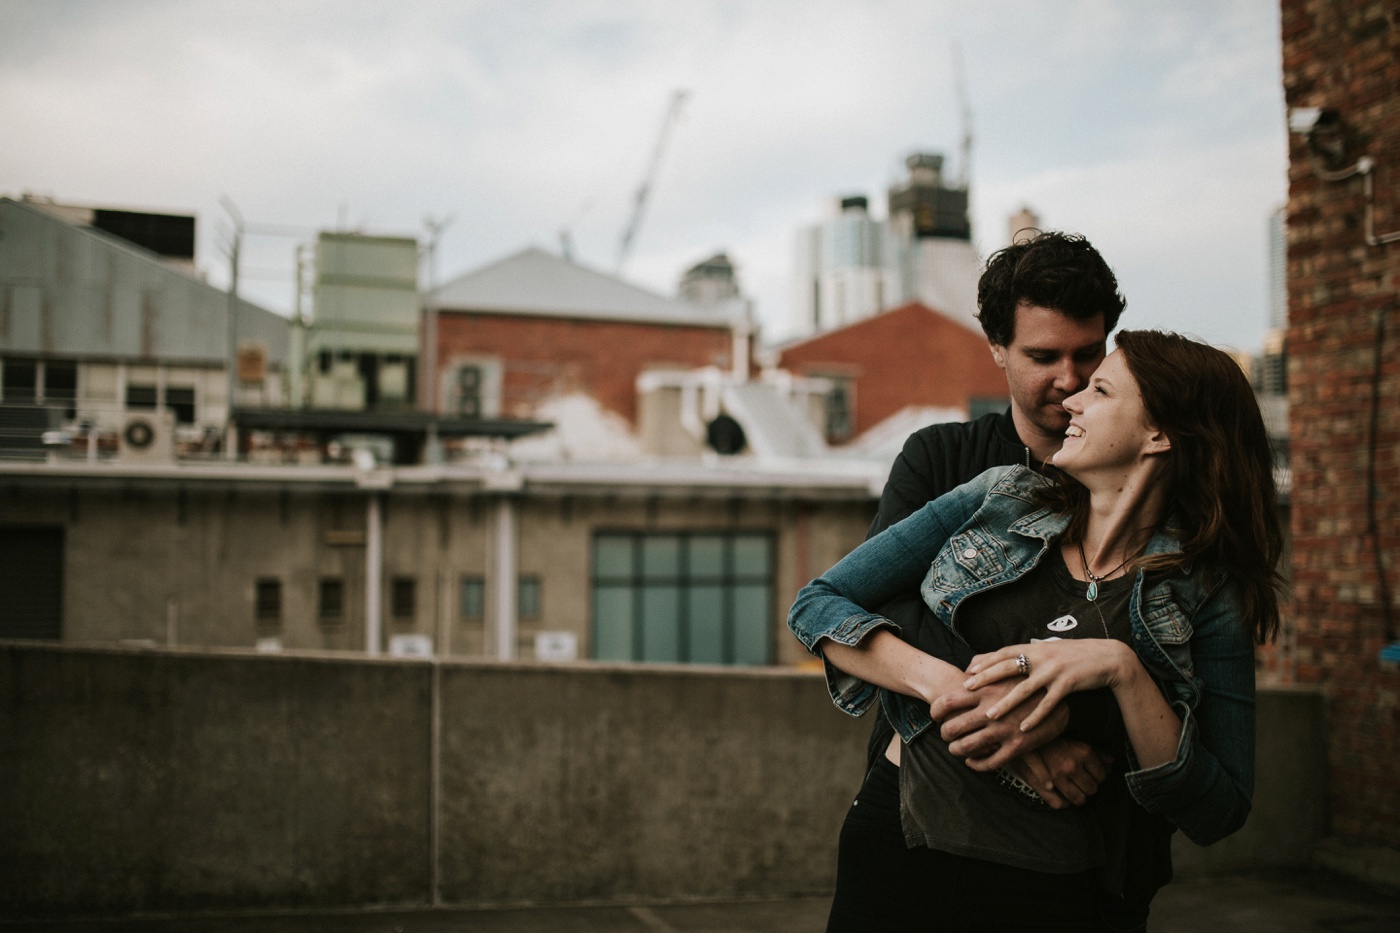 heli-alex_melbourne-fun-candid-gritty-relaxed-city-urban-couples-engagement-session_melbourne-wedding-photography_24